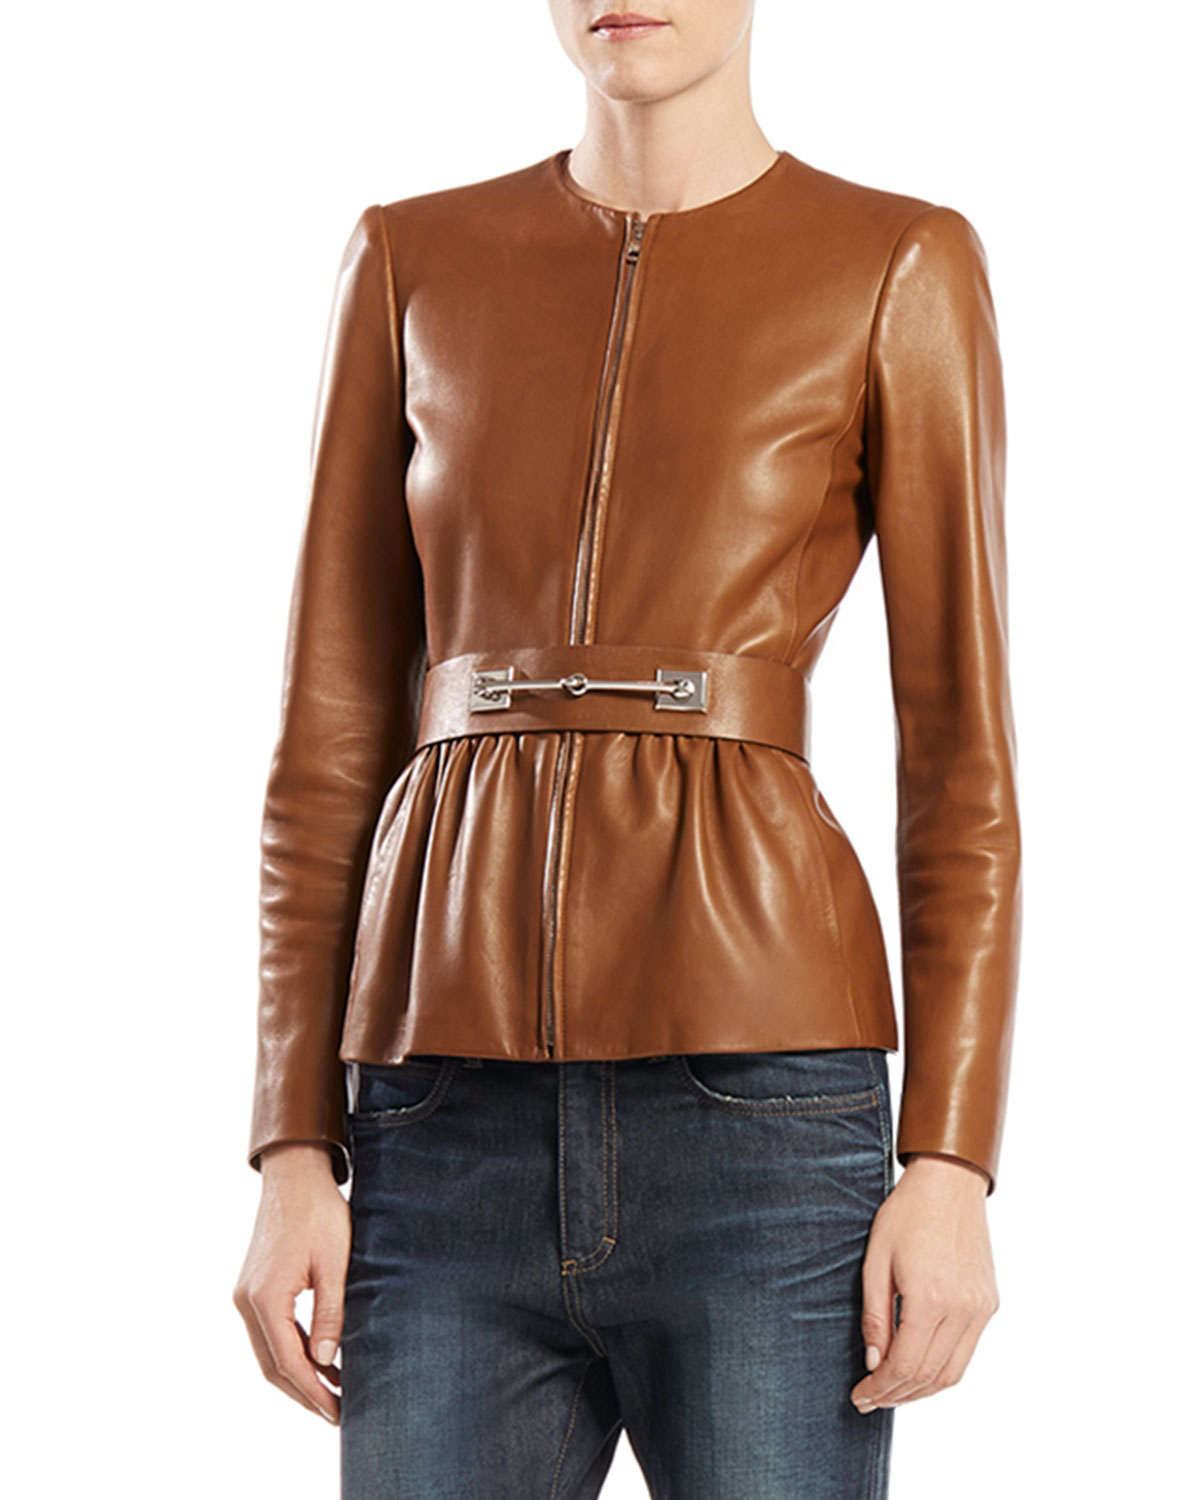 Lyst - Gucci Belted Leather Jacket in Brown